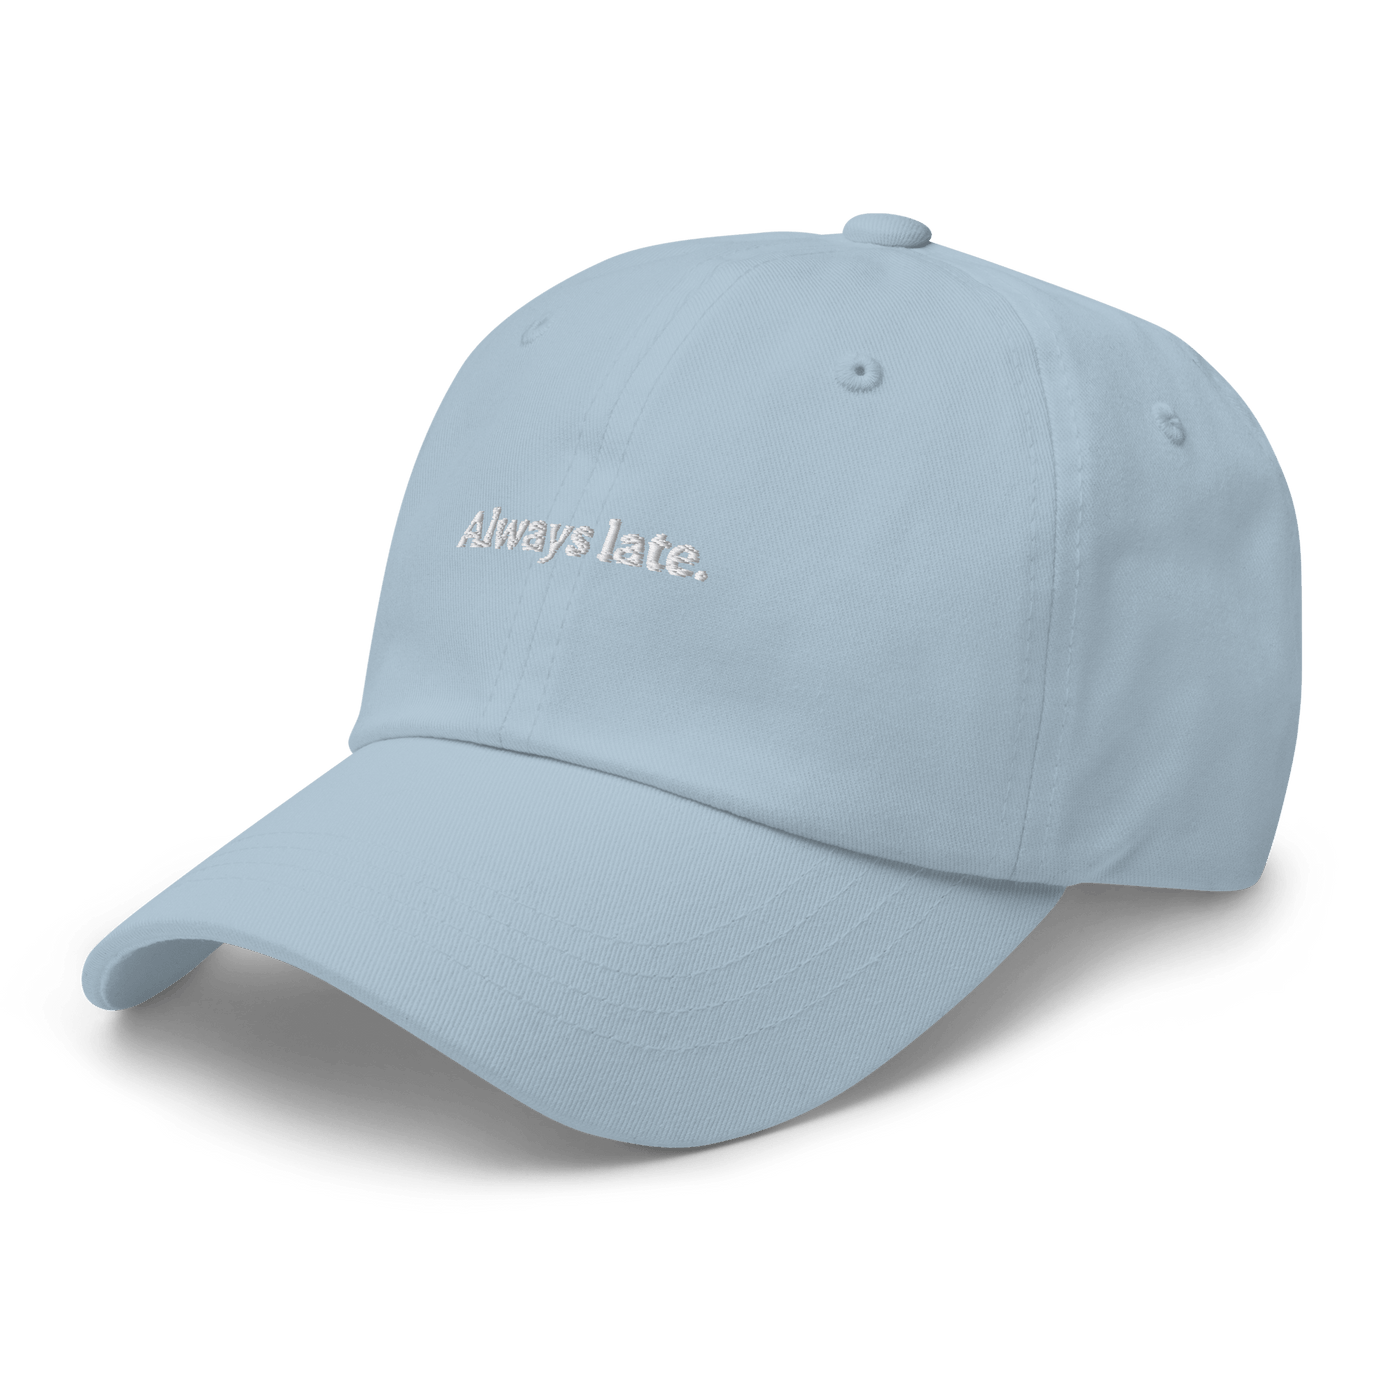 Always Late. Dad hat - Light Blue - - Just Another Cap Store